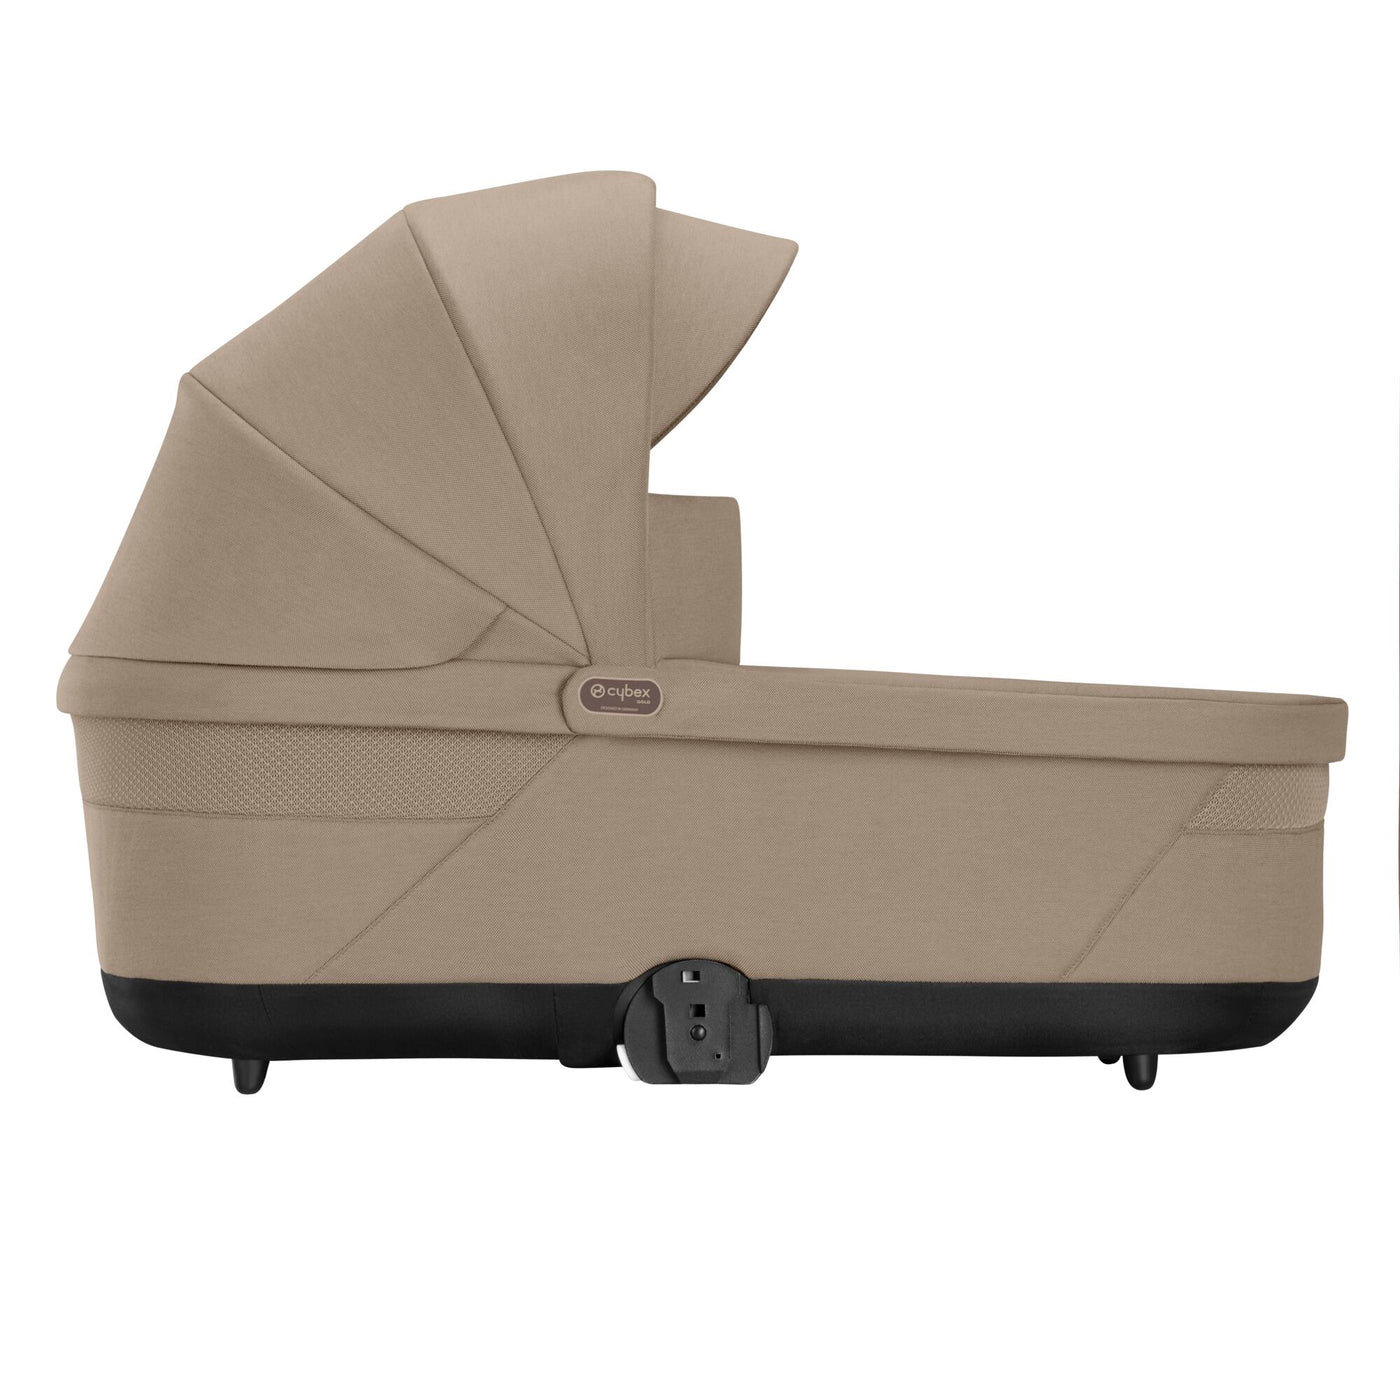 Cybex Cot S Lux Carrycot- Almond Beige